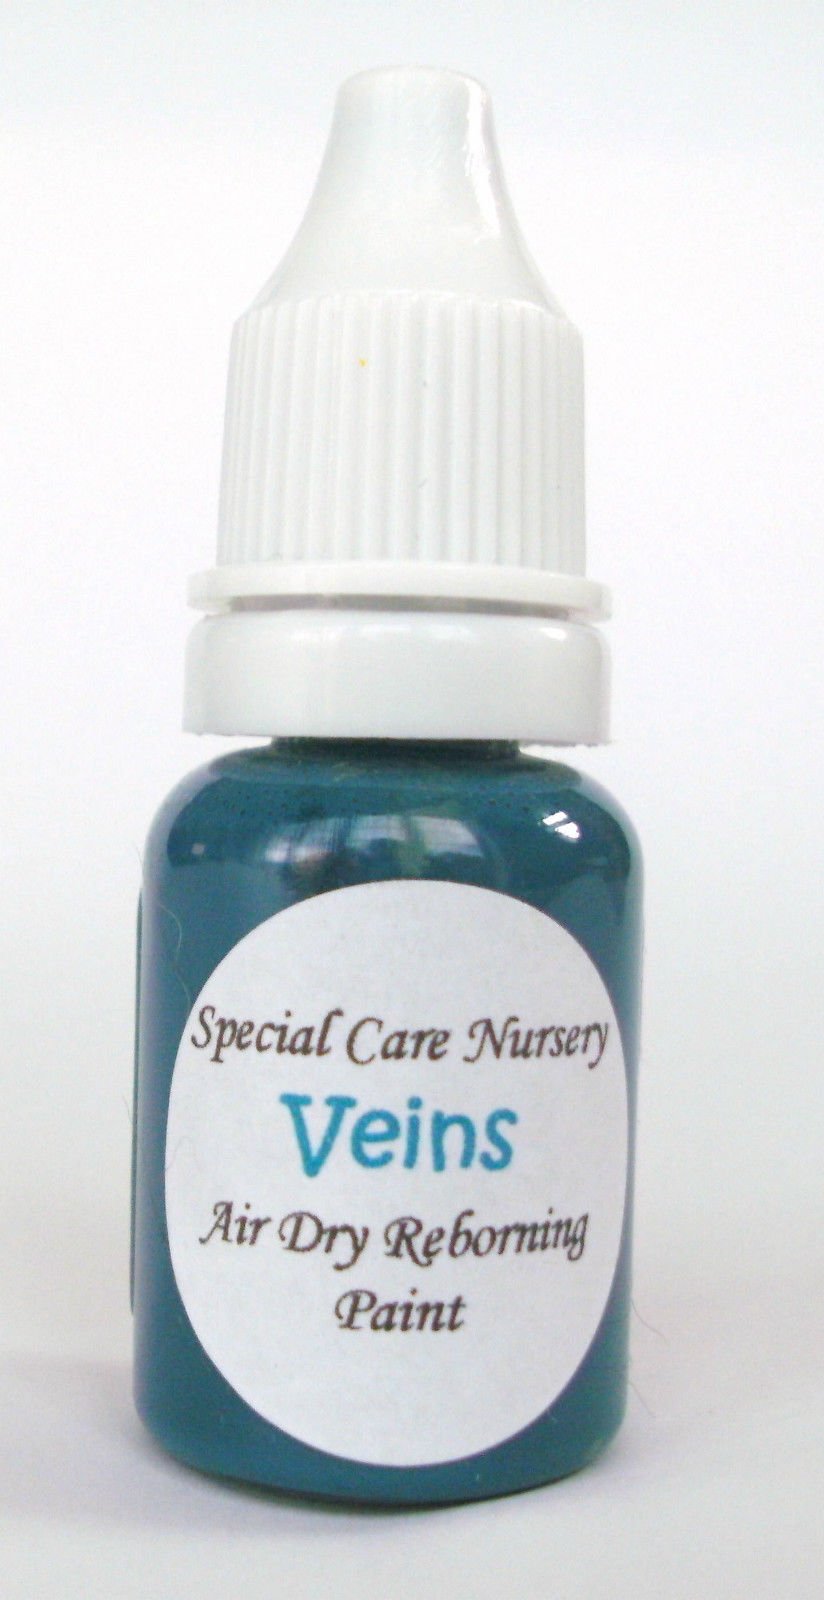 Special Care Nursery Air dry paints - * The Detailing paints* - 10ml Veins.